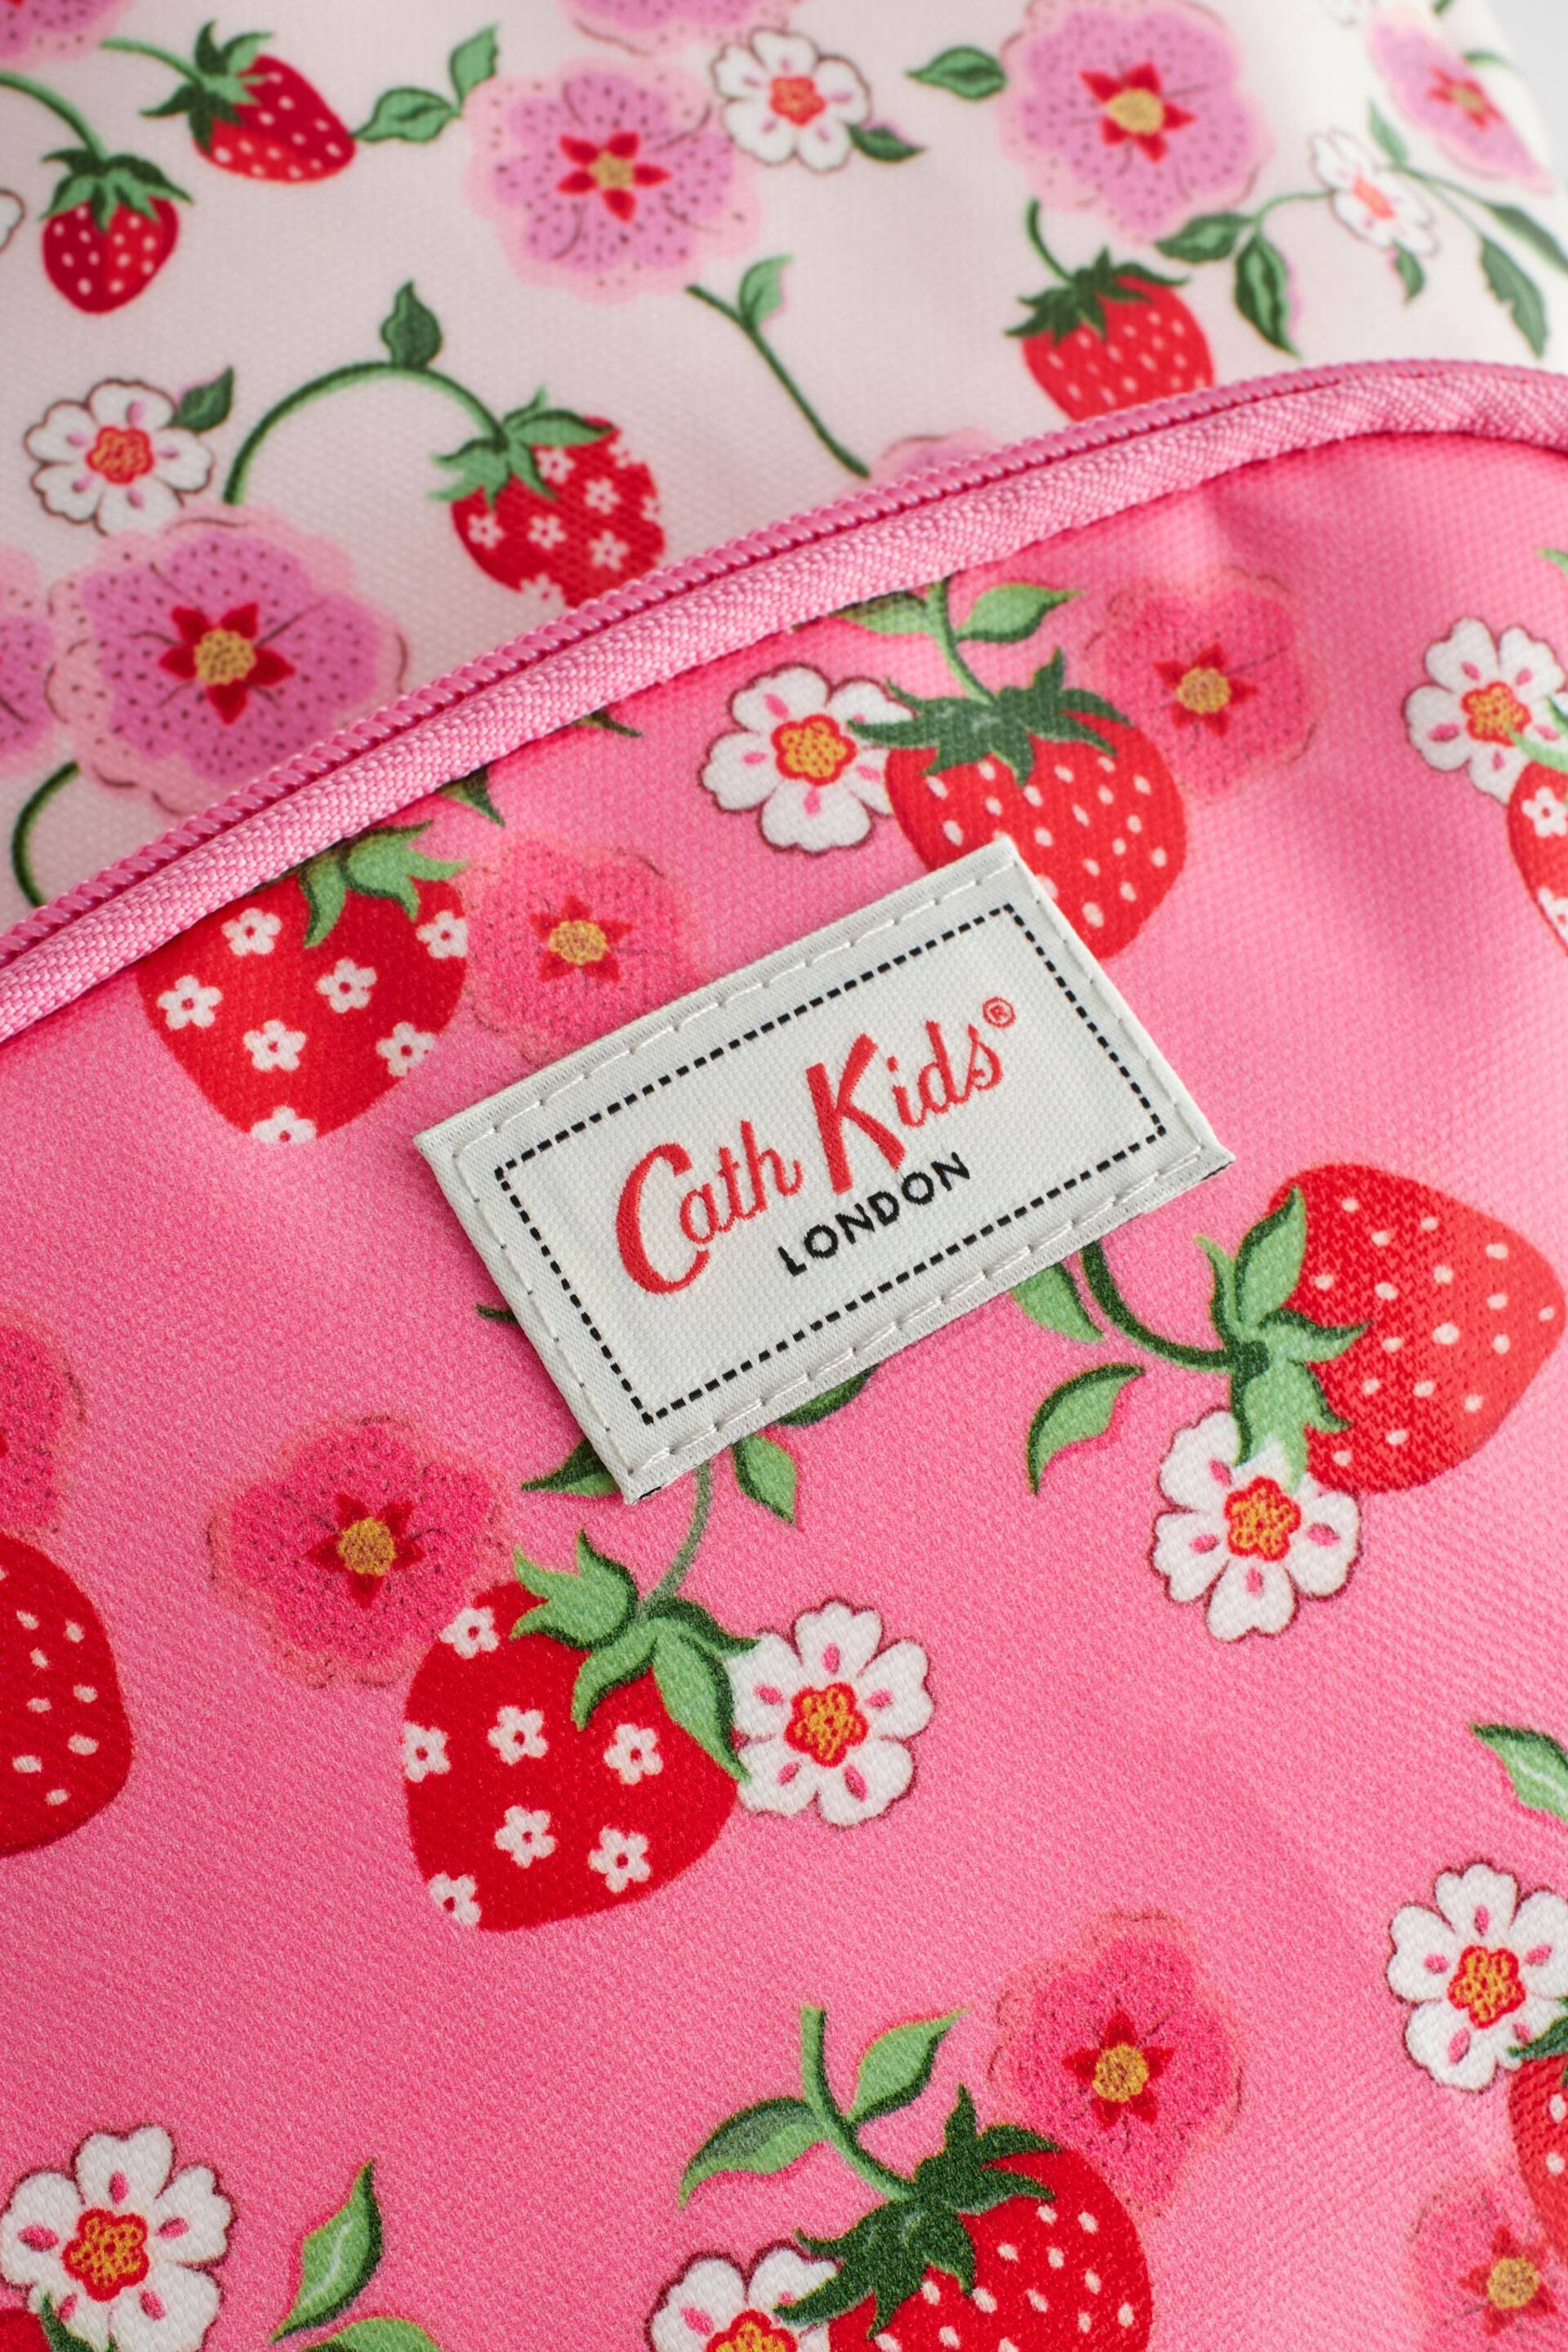 Cath Kidston Pink/White Floral Large Backpack - Image 9 of 12